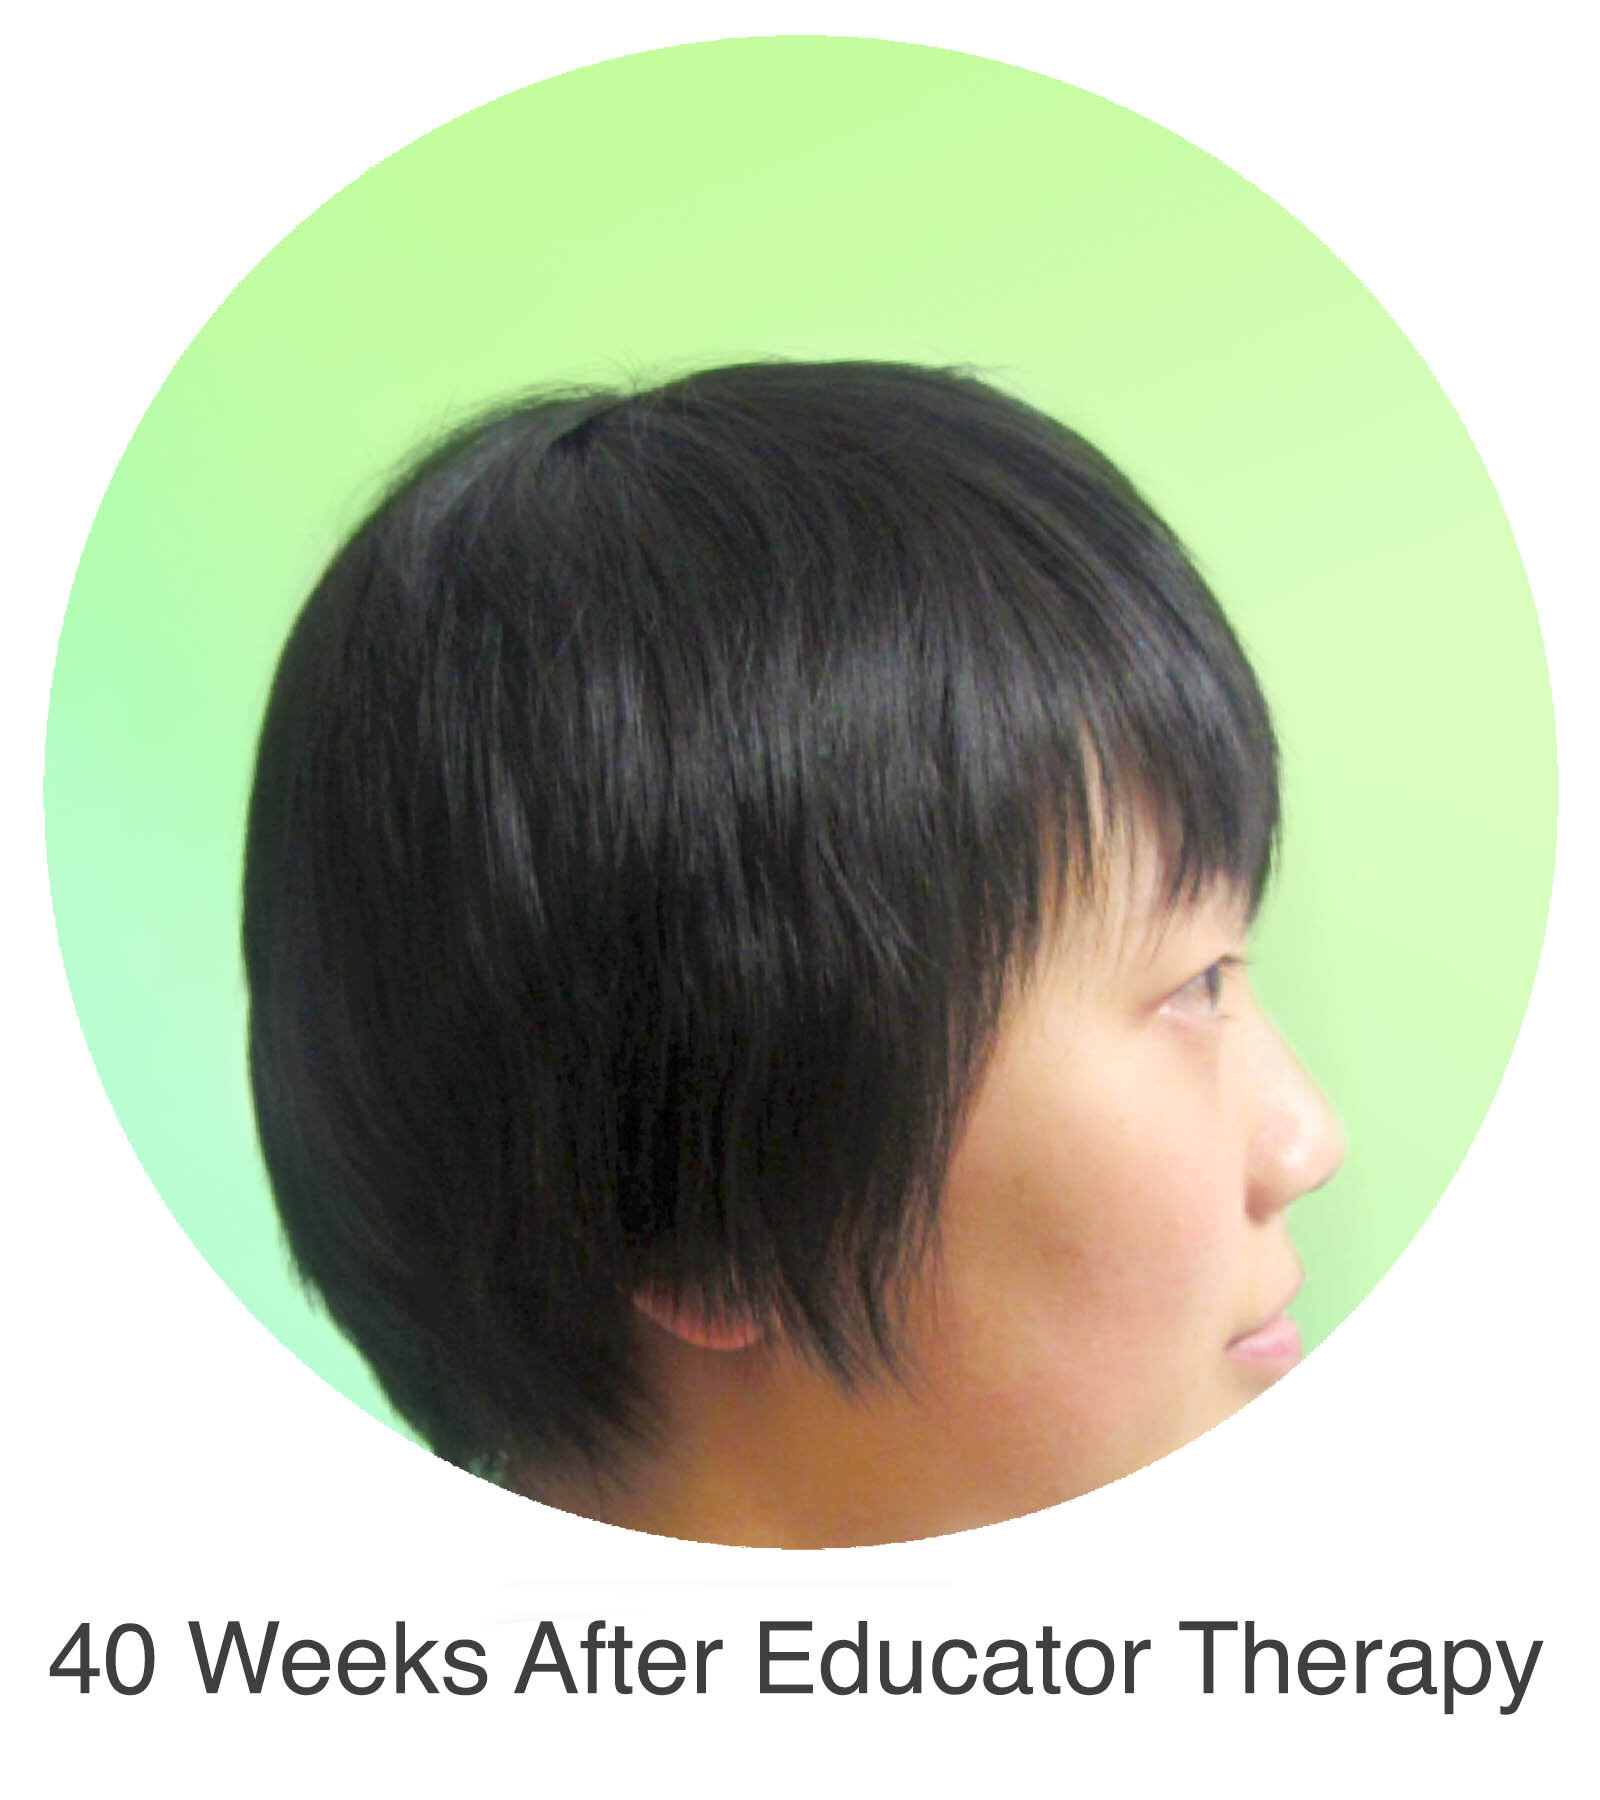 40 Weeks After Educator Therapy